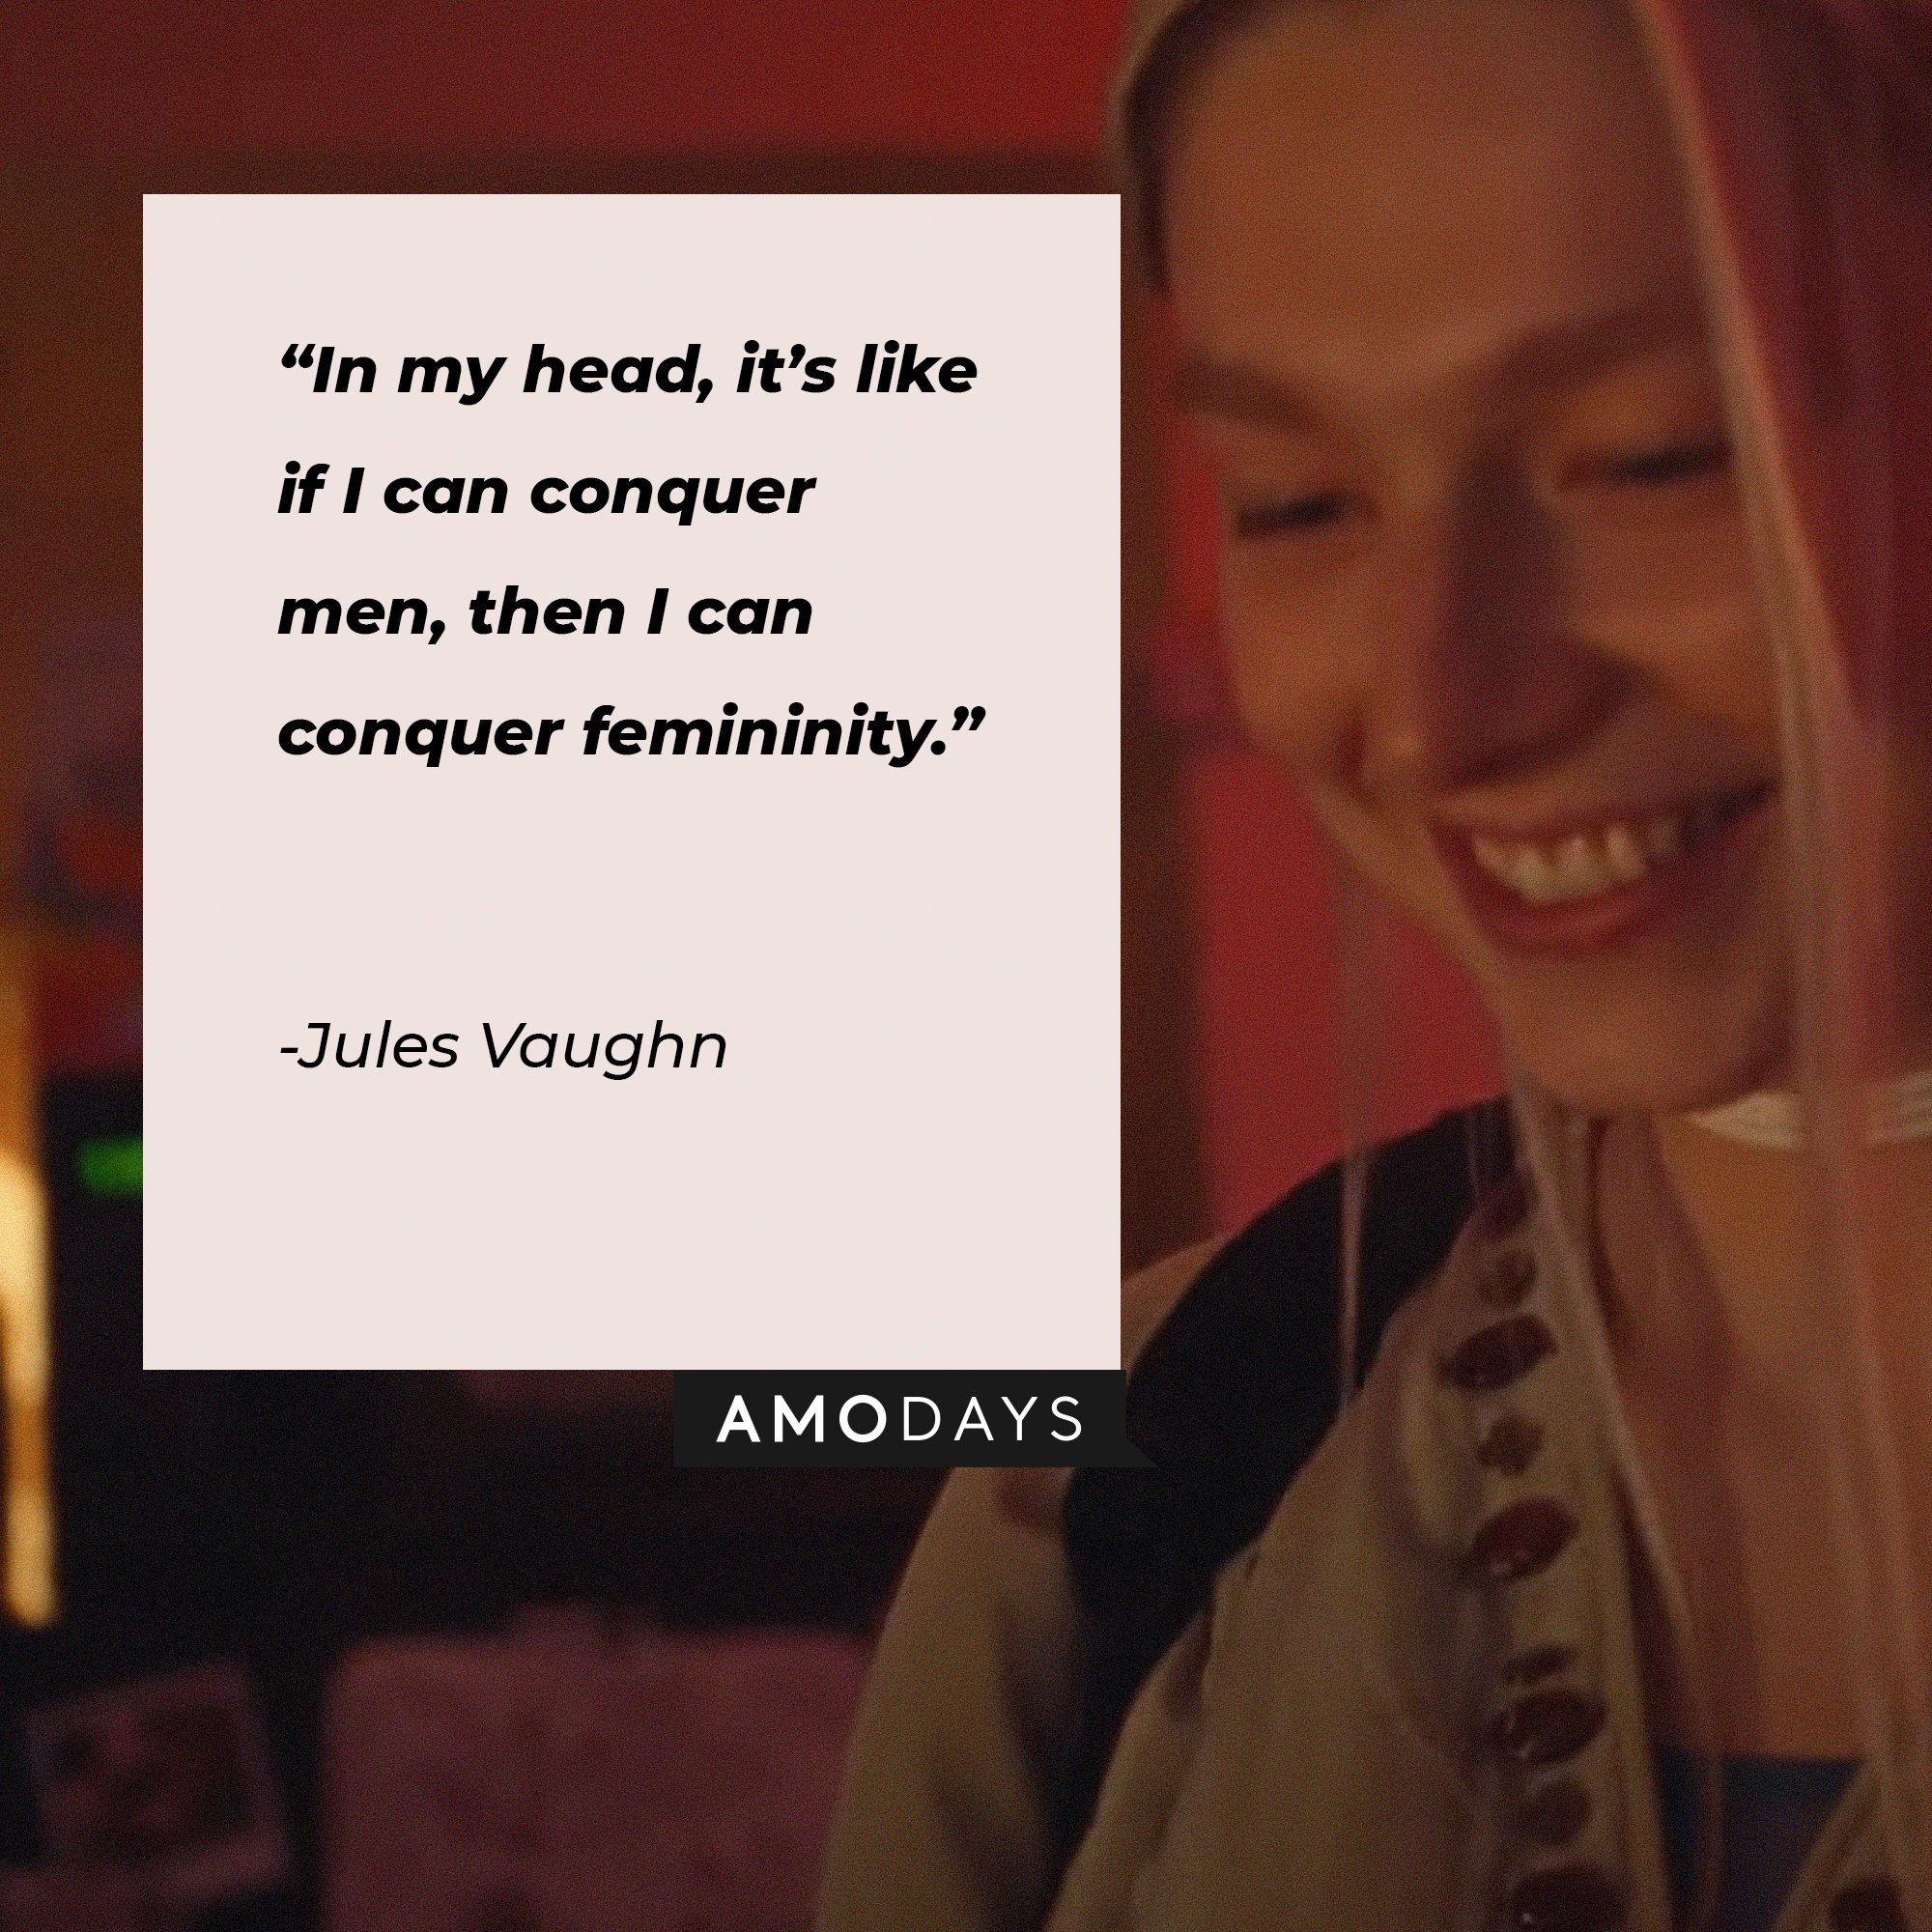 Jules Vaughn’s quote: “In my head, it’s like if I can conquer men, then I can conquer femininity.” | Image: AmoDays